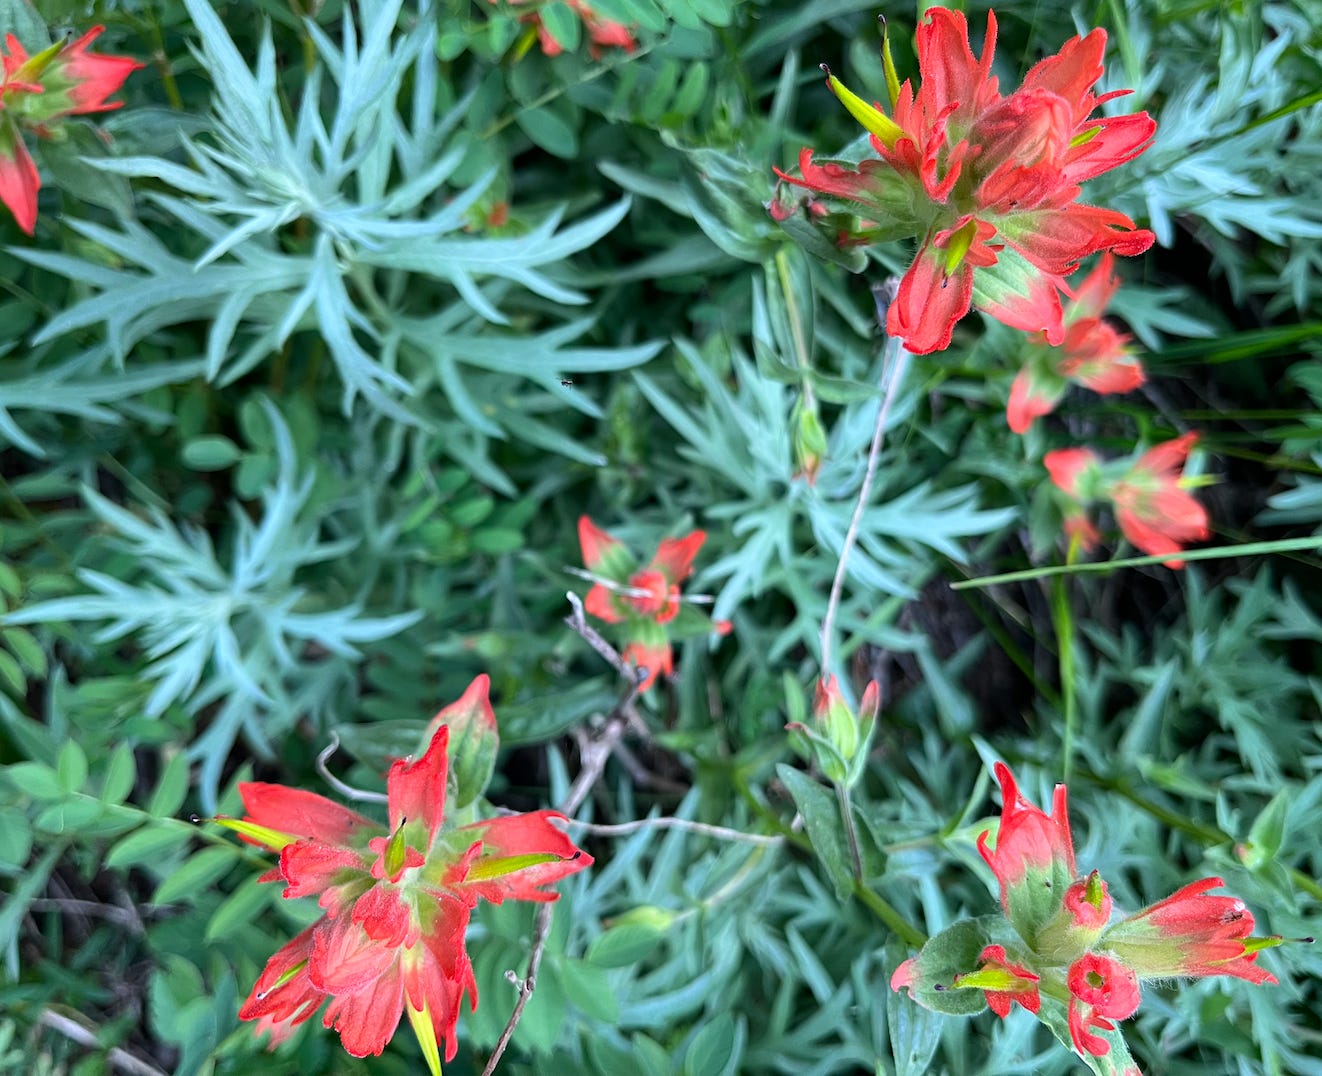 Red wildflowers against blue/green grass